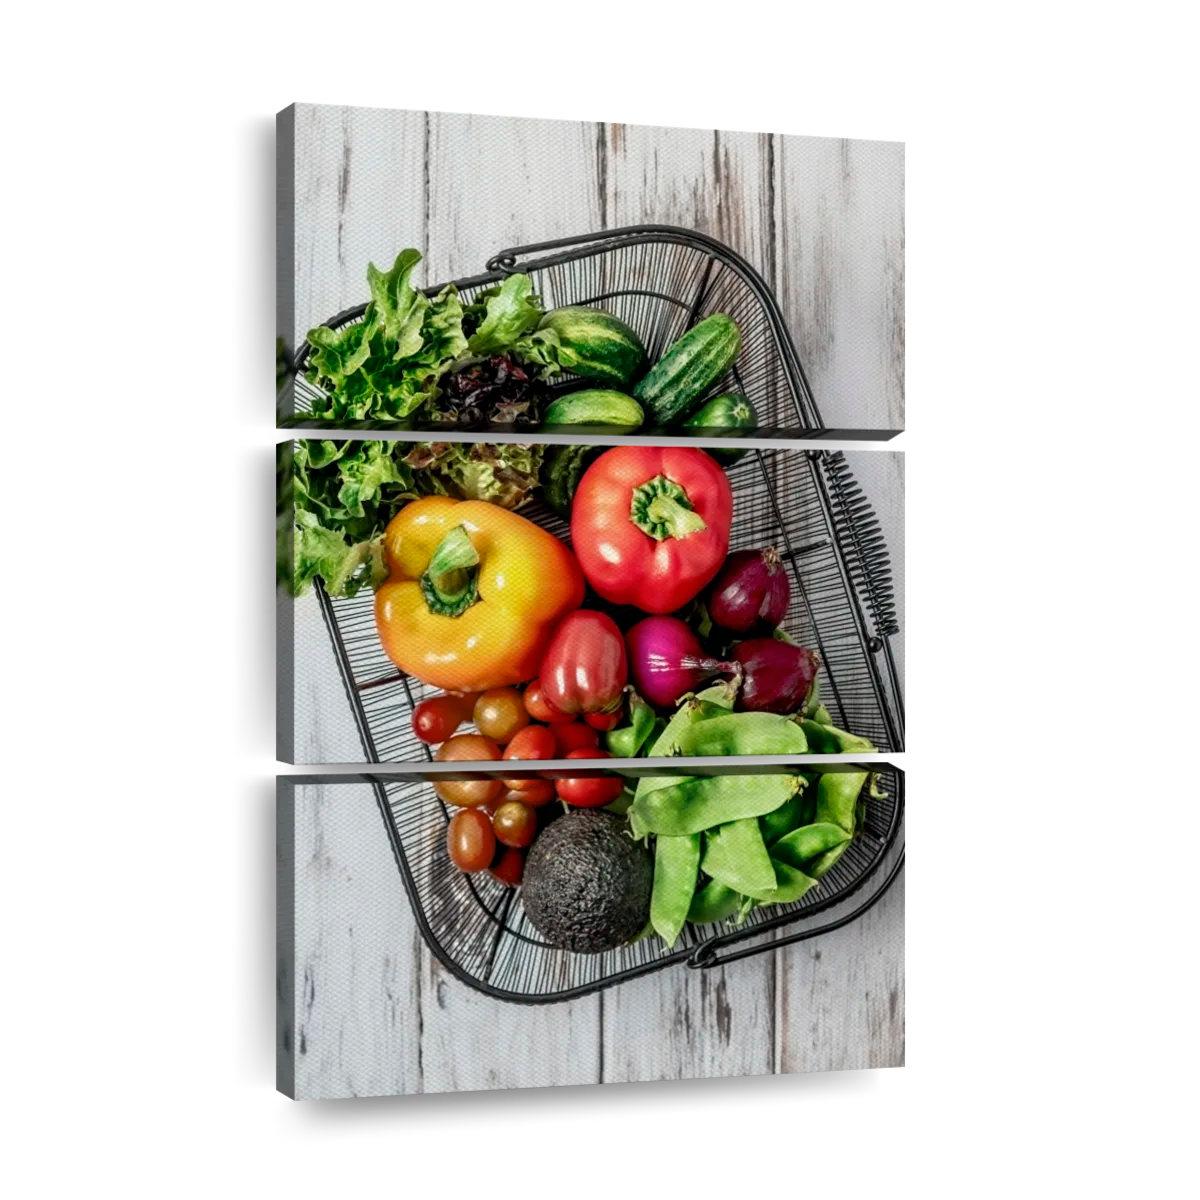 Basket Of Fruits And Vegetables Wall Art | Photography